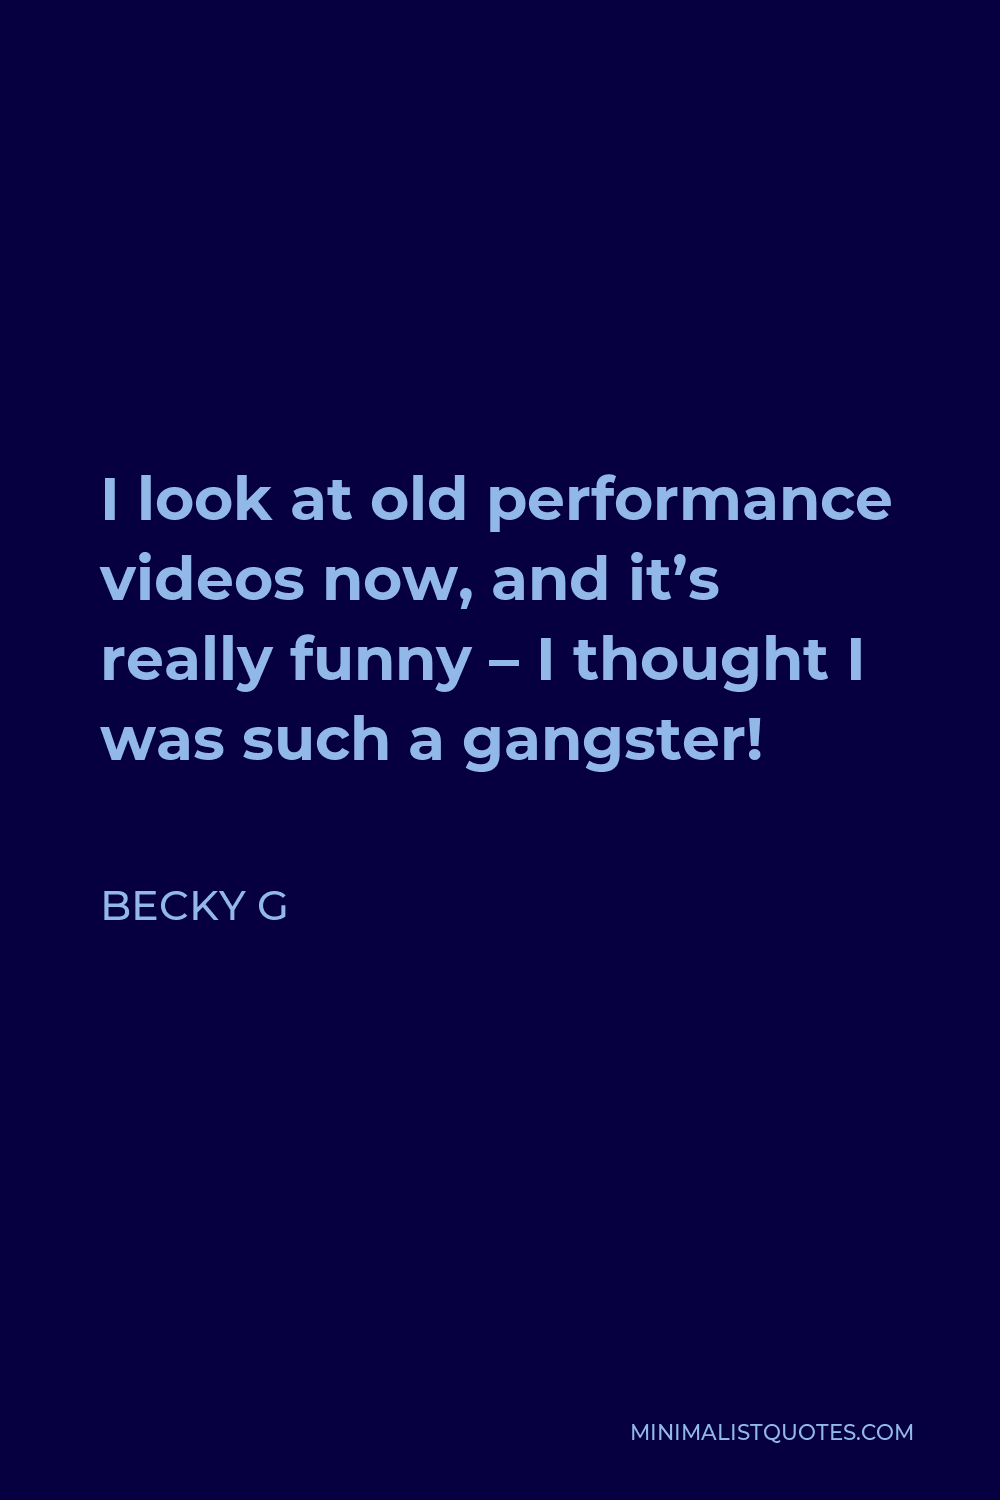 Becky G Quote: I look at old performance videos now, and it's really funny  - I thought I was such a gangster!